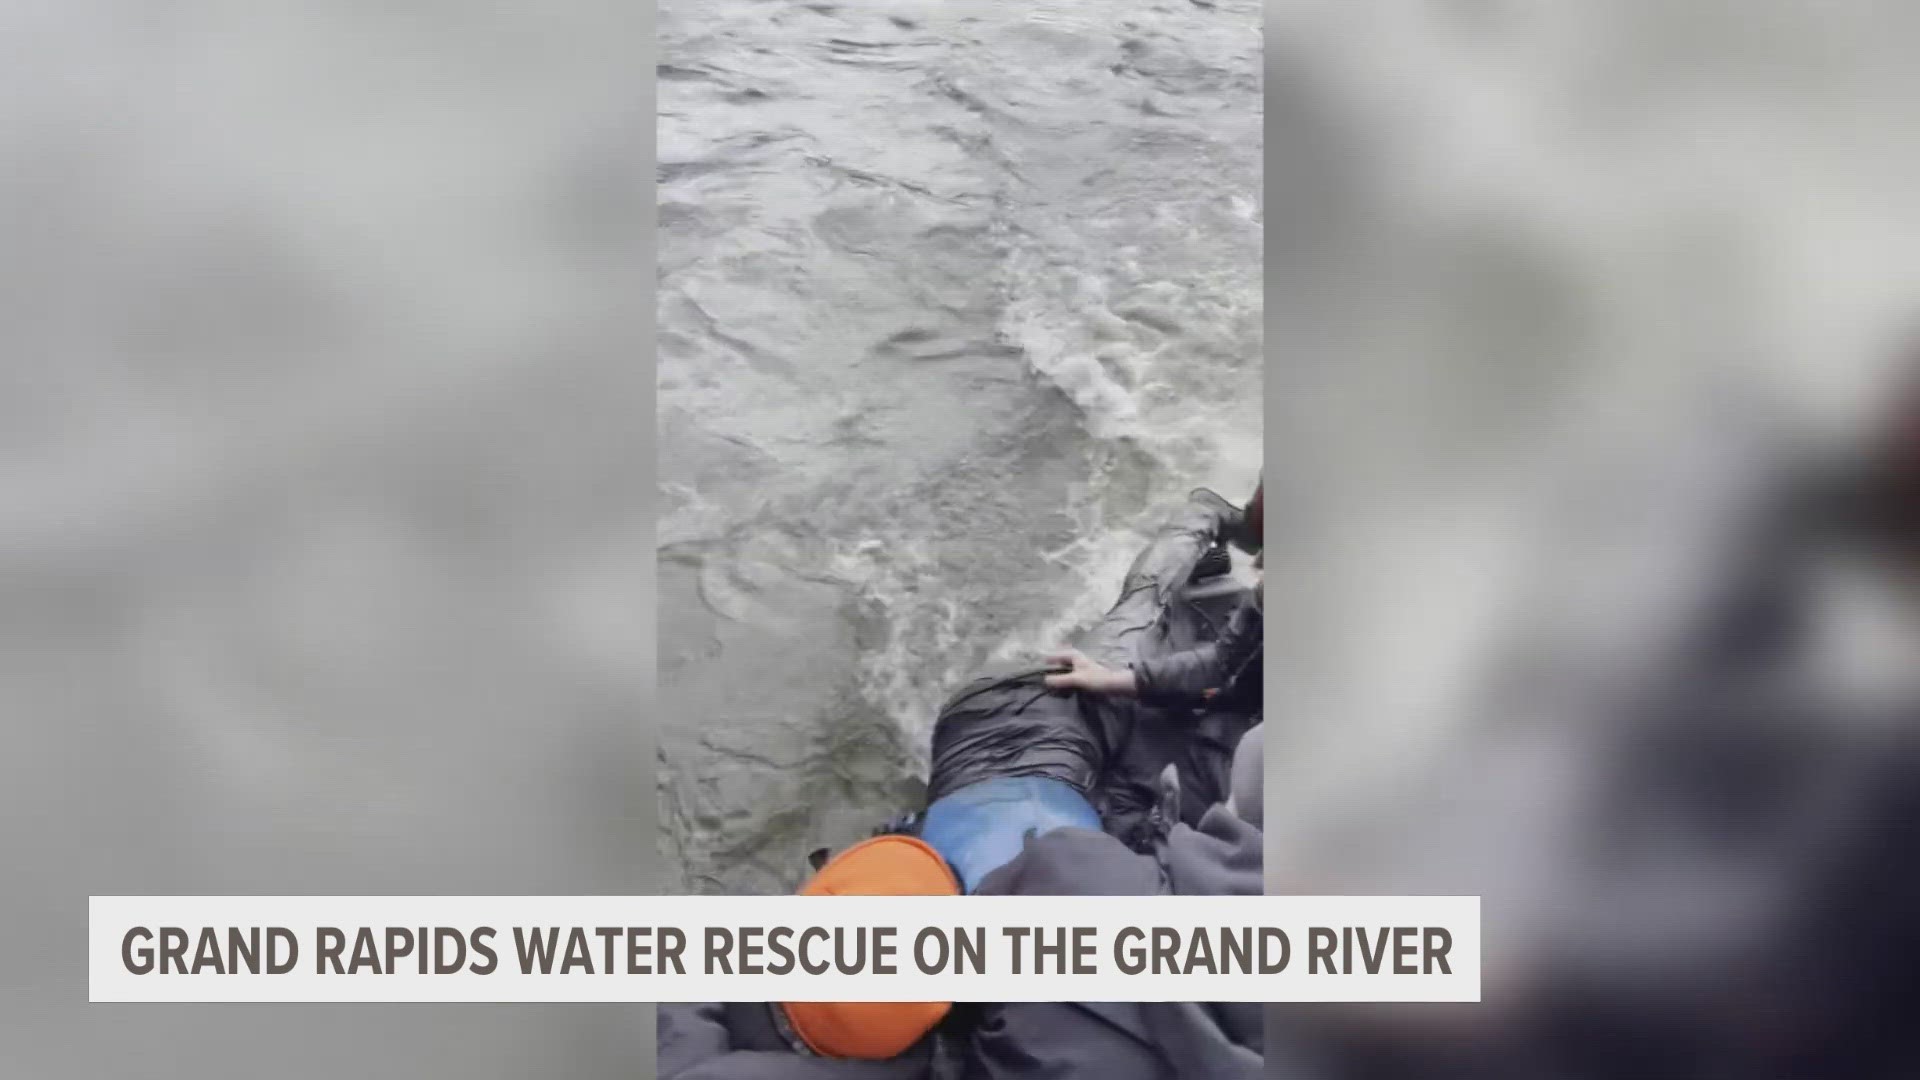 A group on a fishing boat spotted the kayaker go over a dam on the Grand River. They immediately pulled up their anchor to save him from drowning.